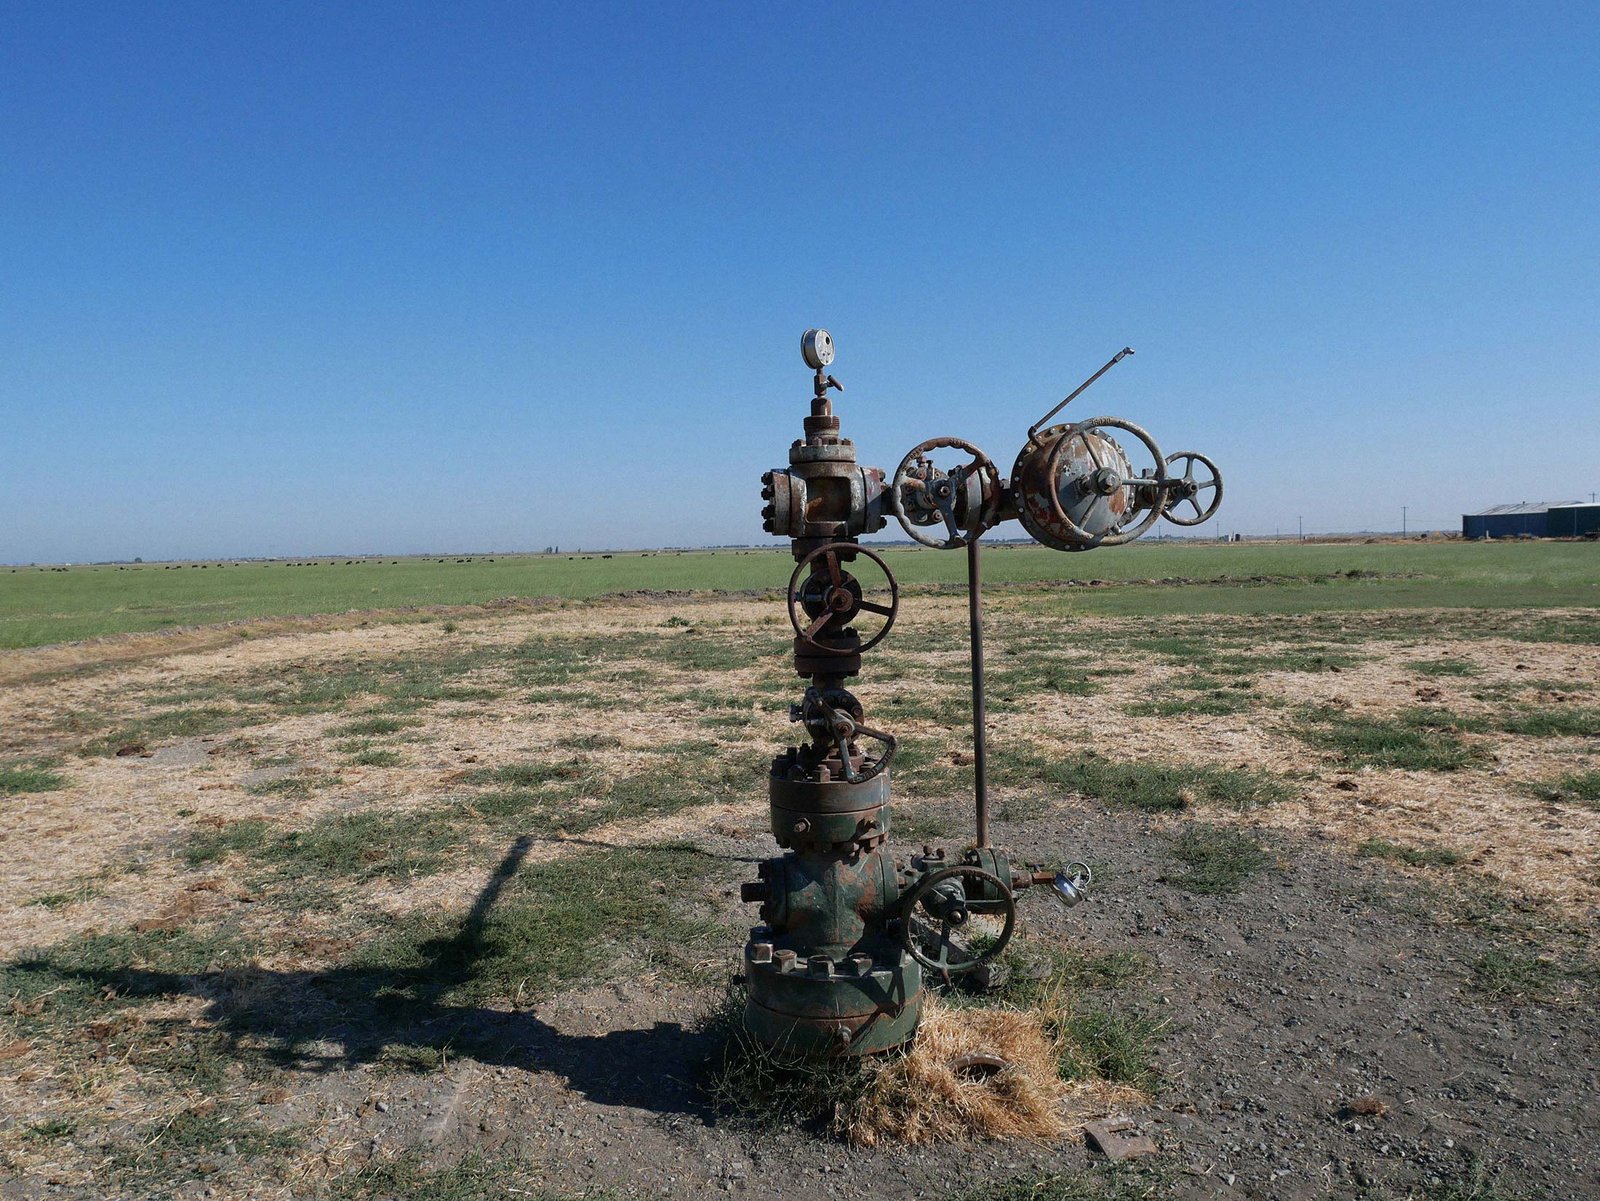 A solitary orphan wellhead equipment setup in a vast, open field under a clear blue sky, indicative of the oil and gas industry's remote operations, with valves and pipes for controlling well pressure and flow.